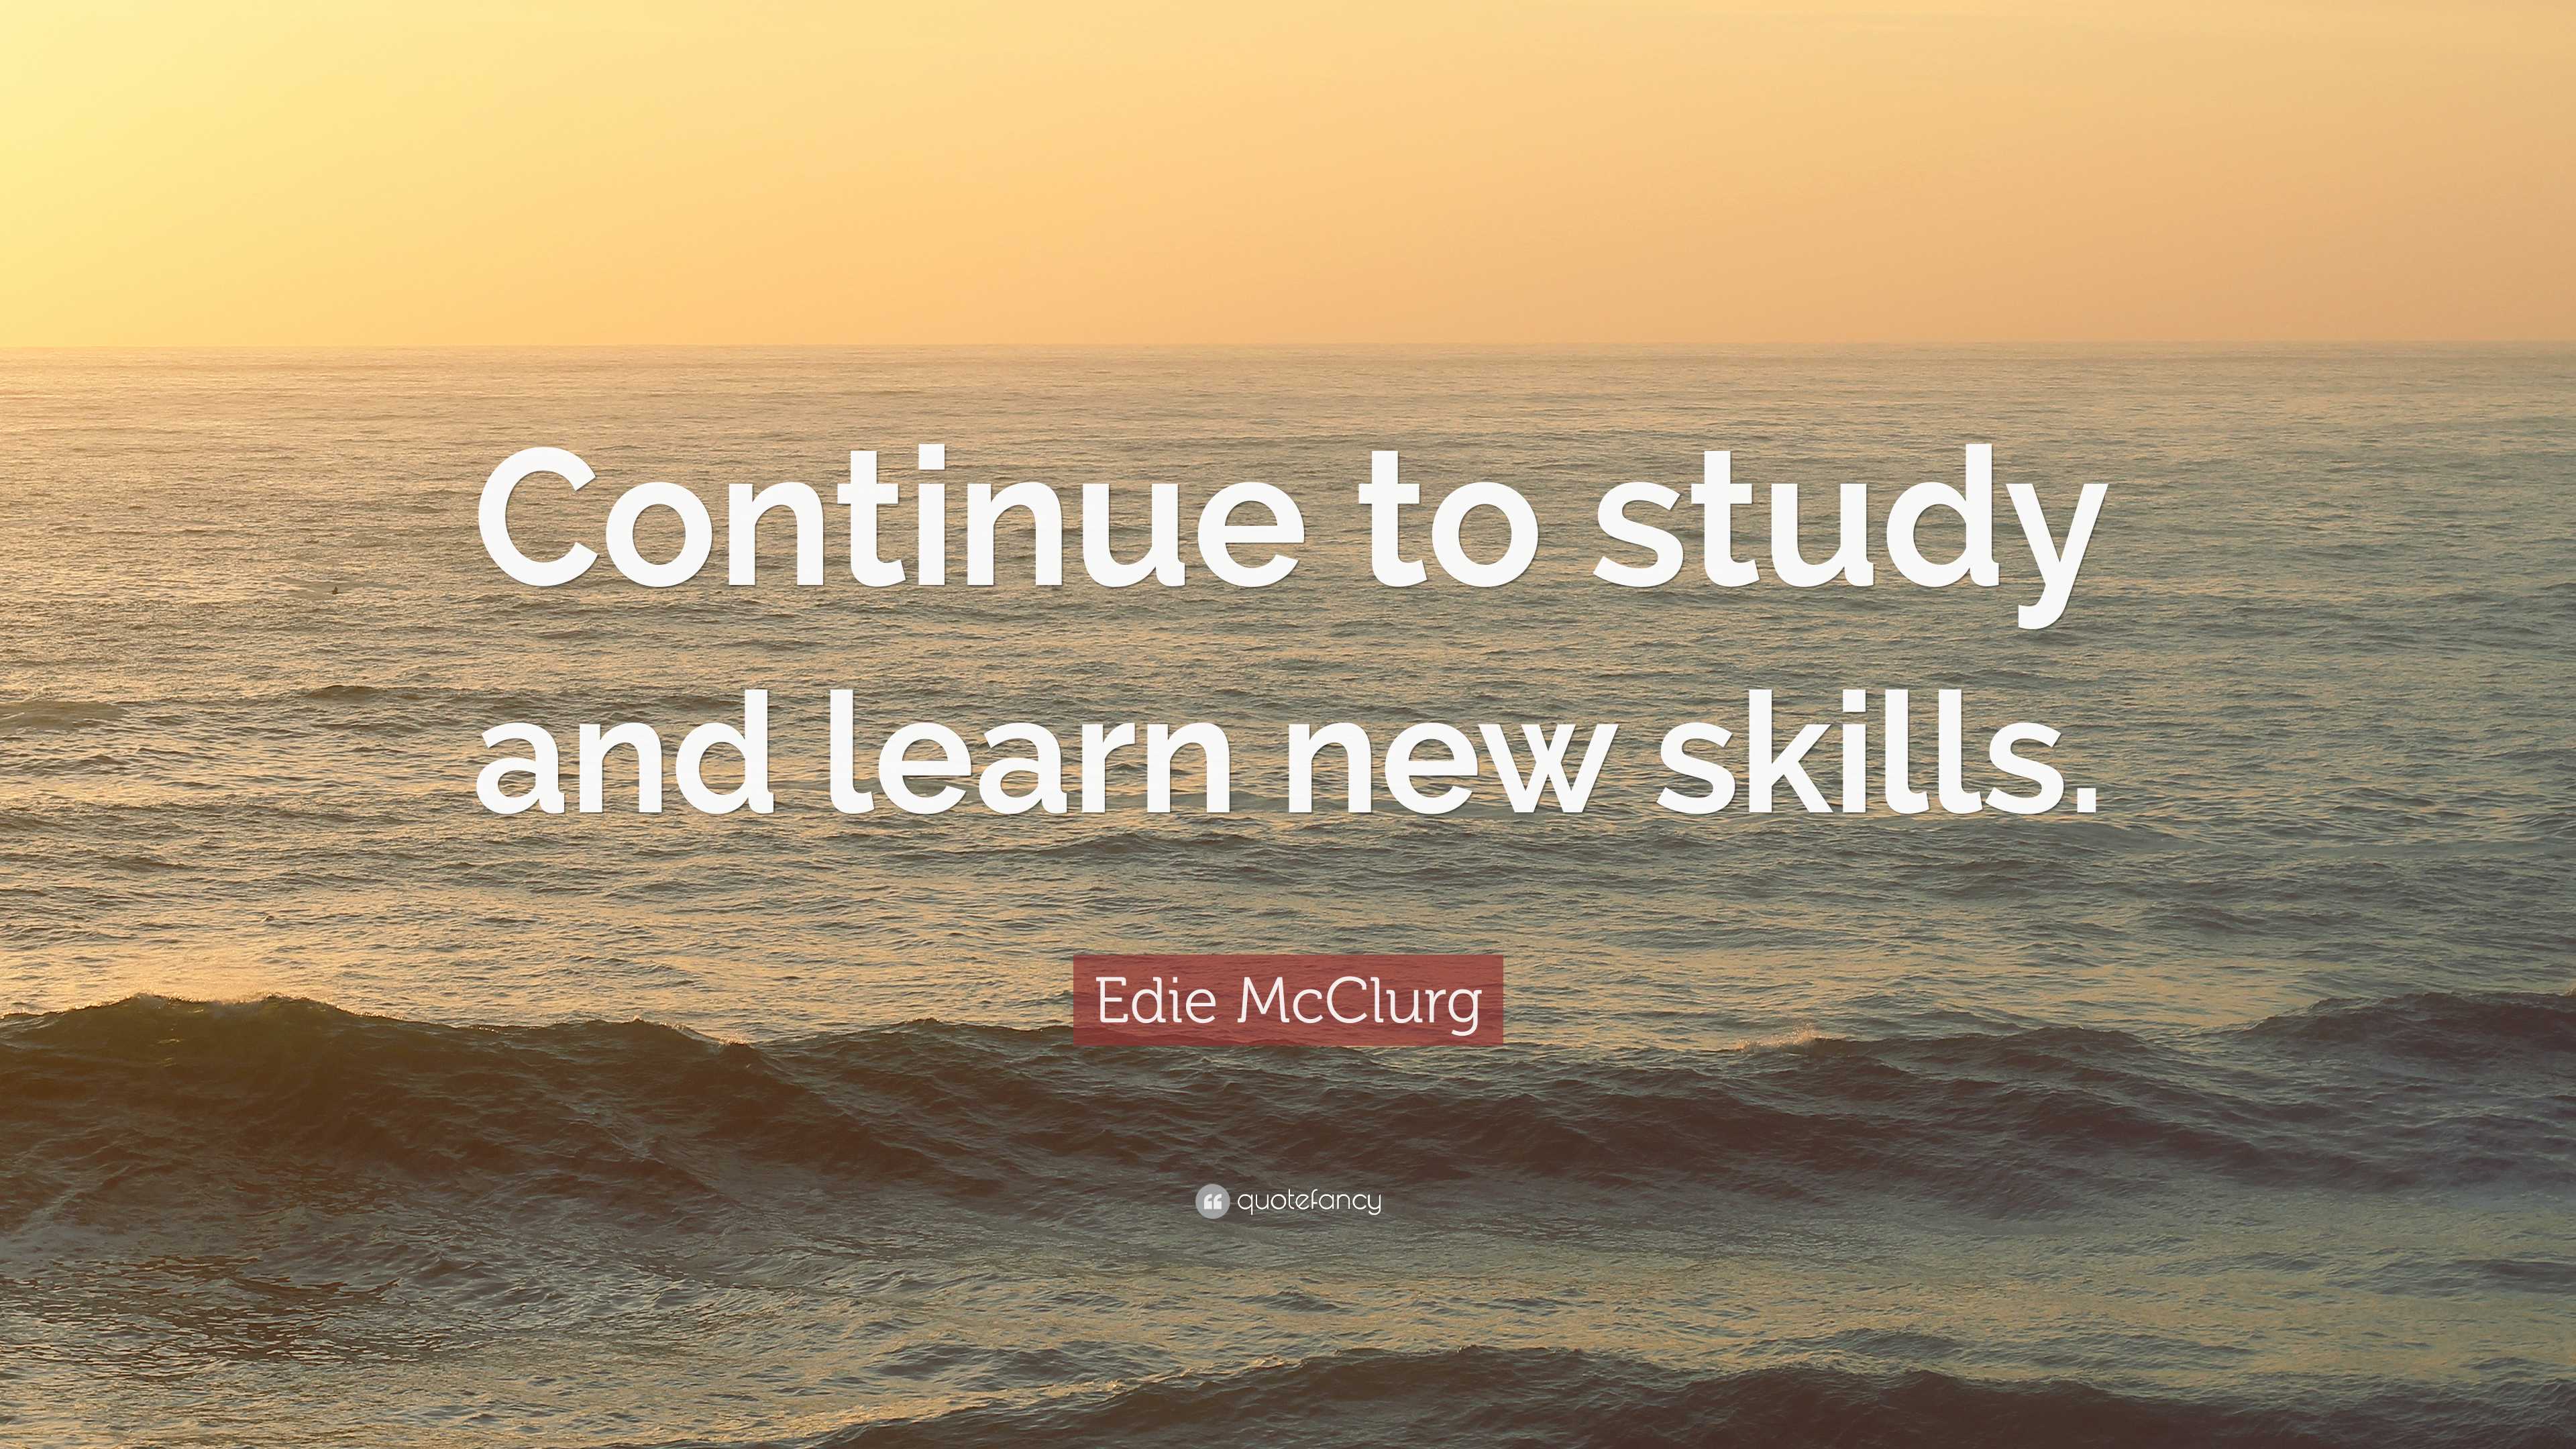 Quotes, Books, Courses, Videos & Tips on Learning Skills. The art of  learning new skills…